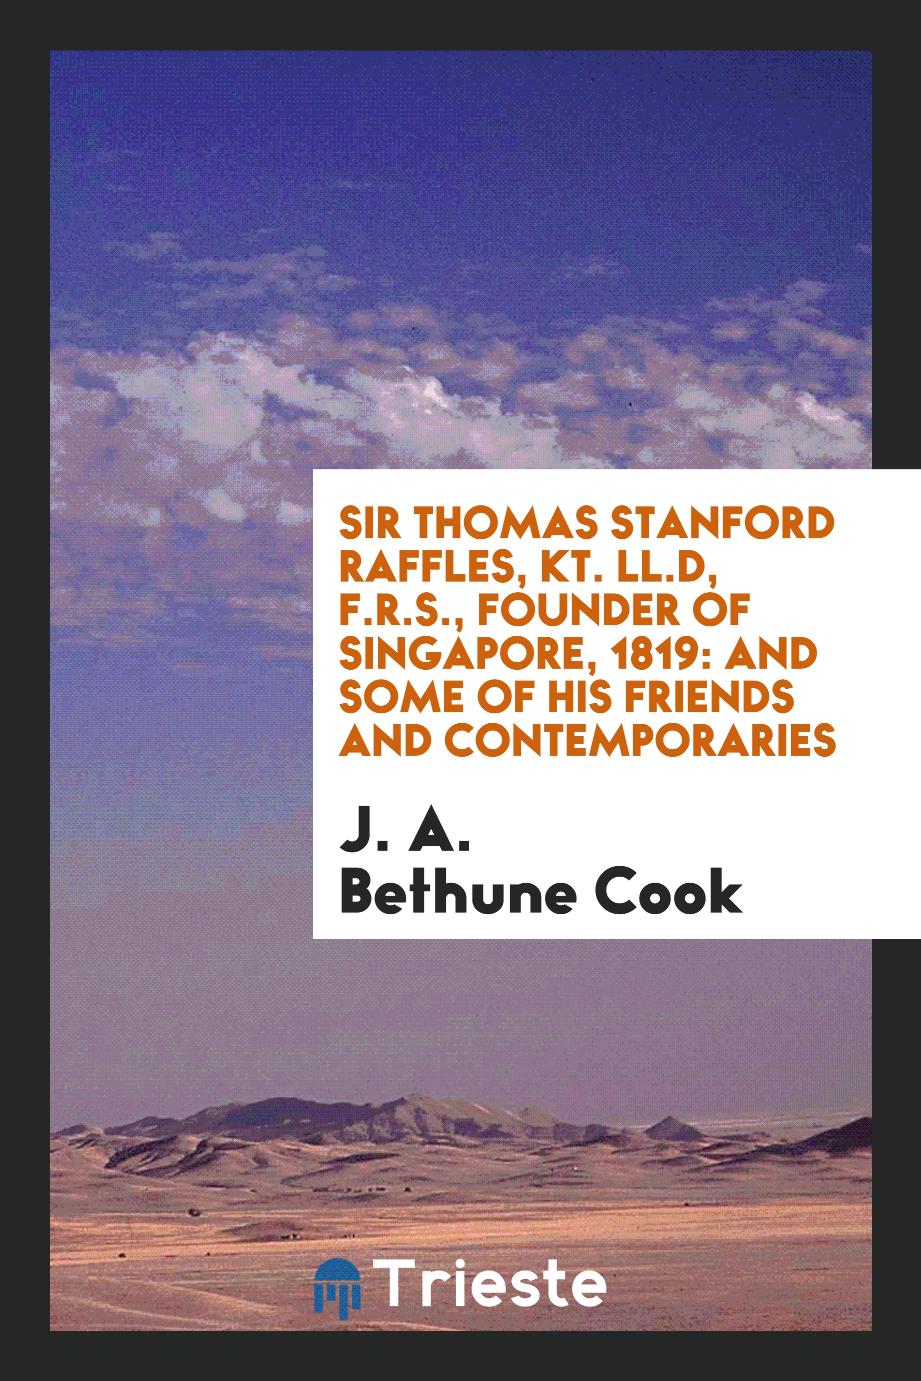 Sir Thomas Stanford Raffles, Kt. LL.D, F.R.S., founder of Singapore, 1819: and some of his friends and contemporaries